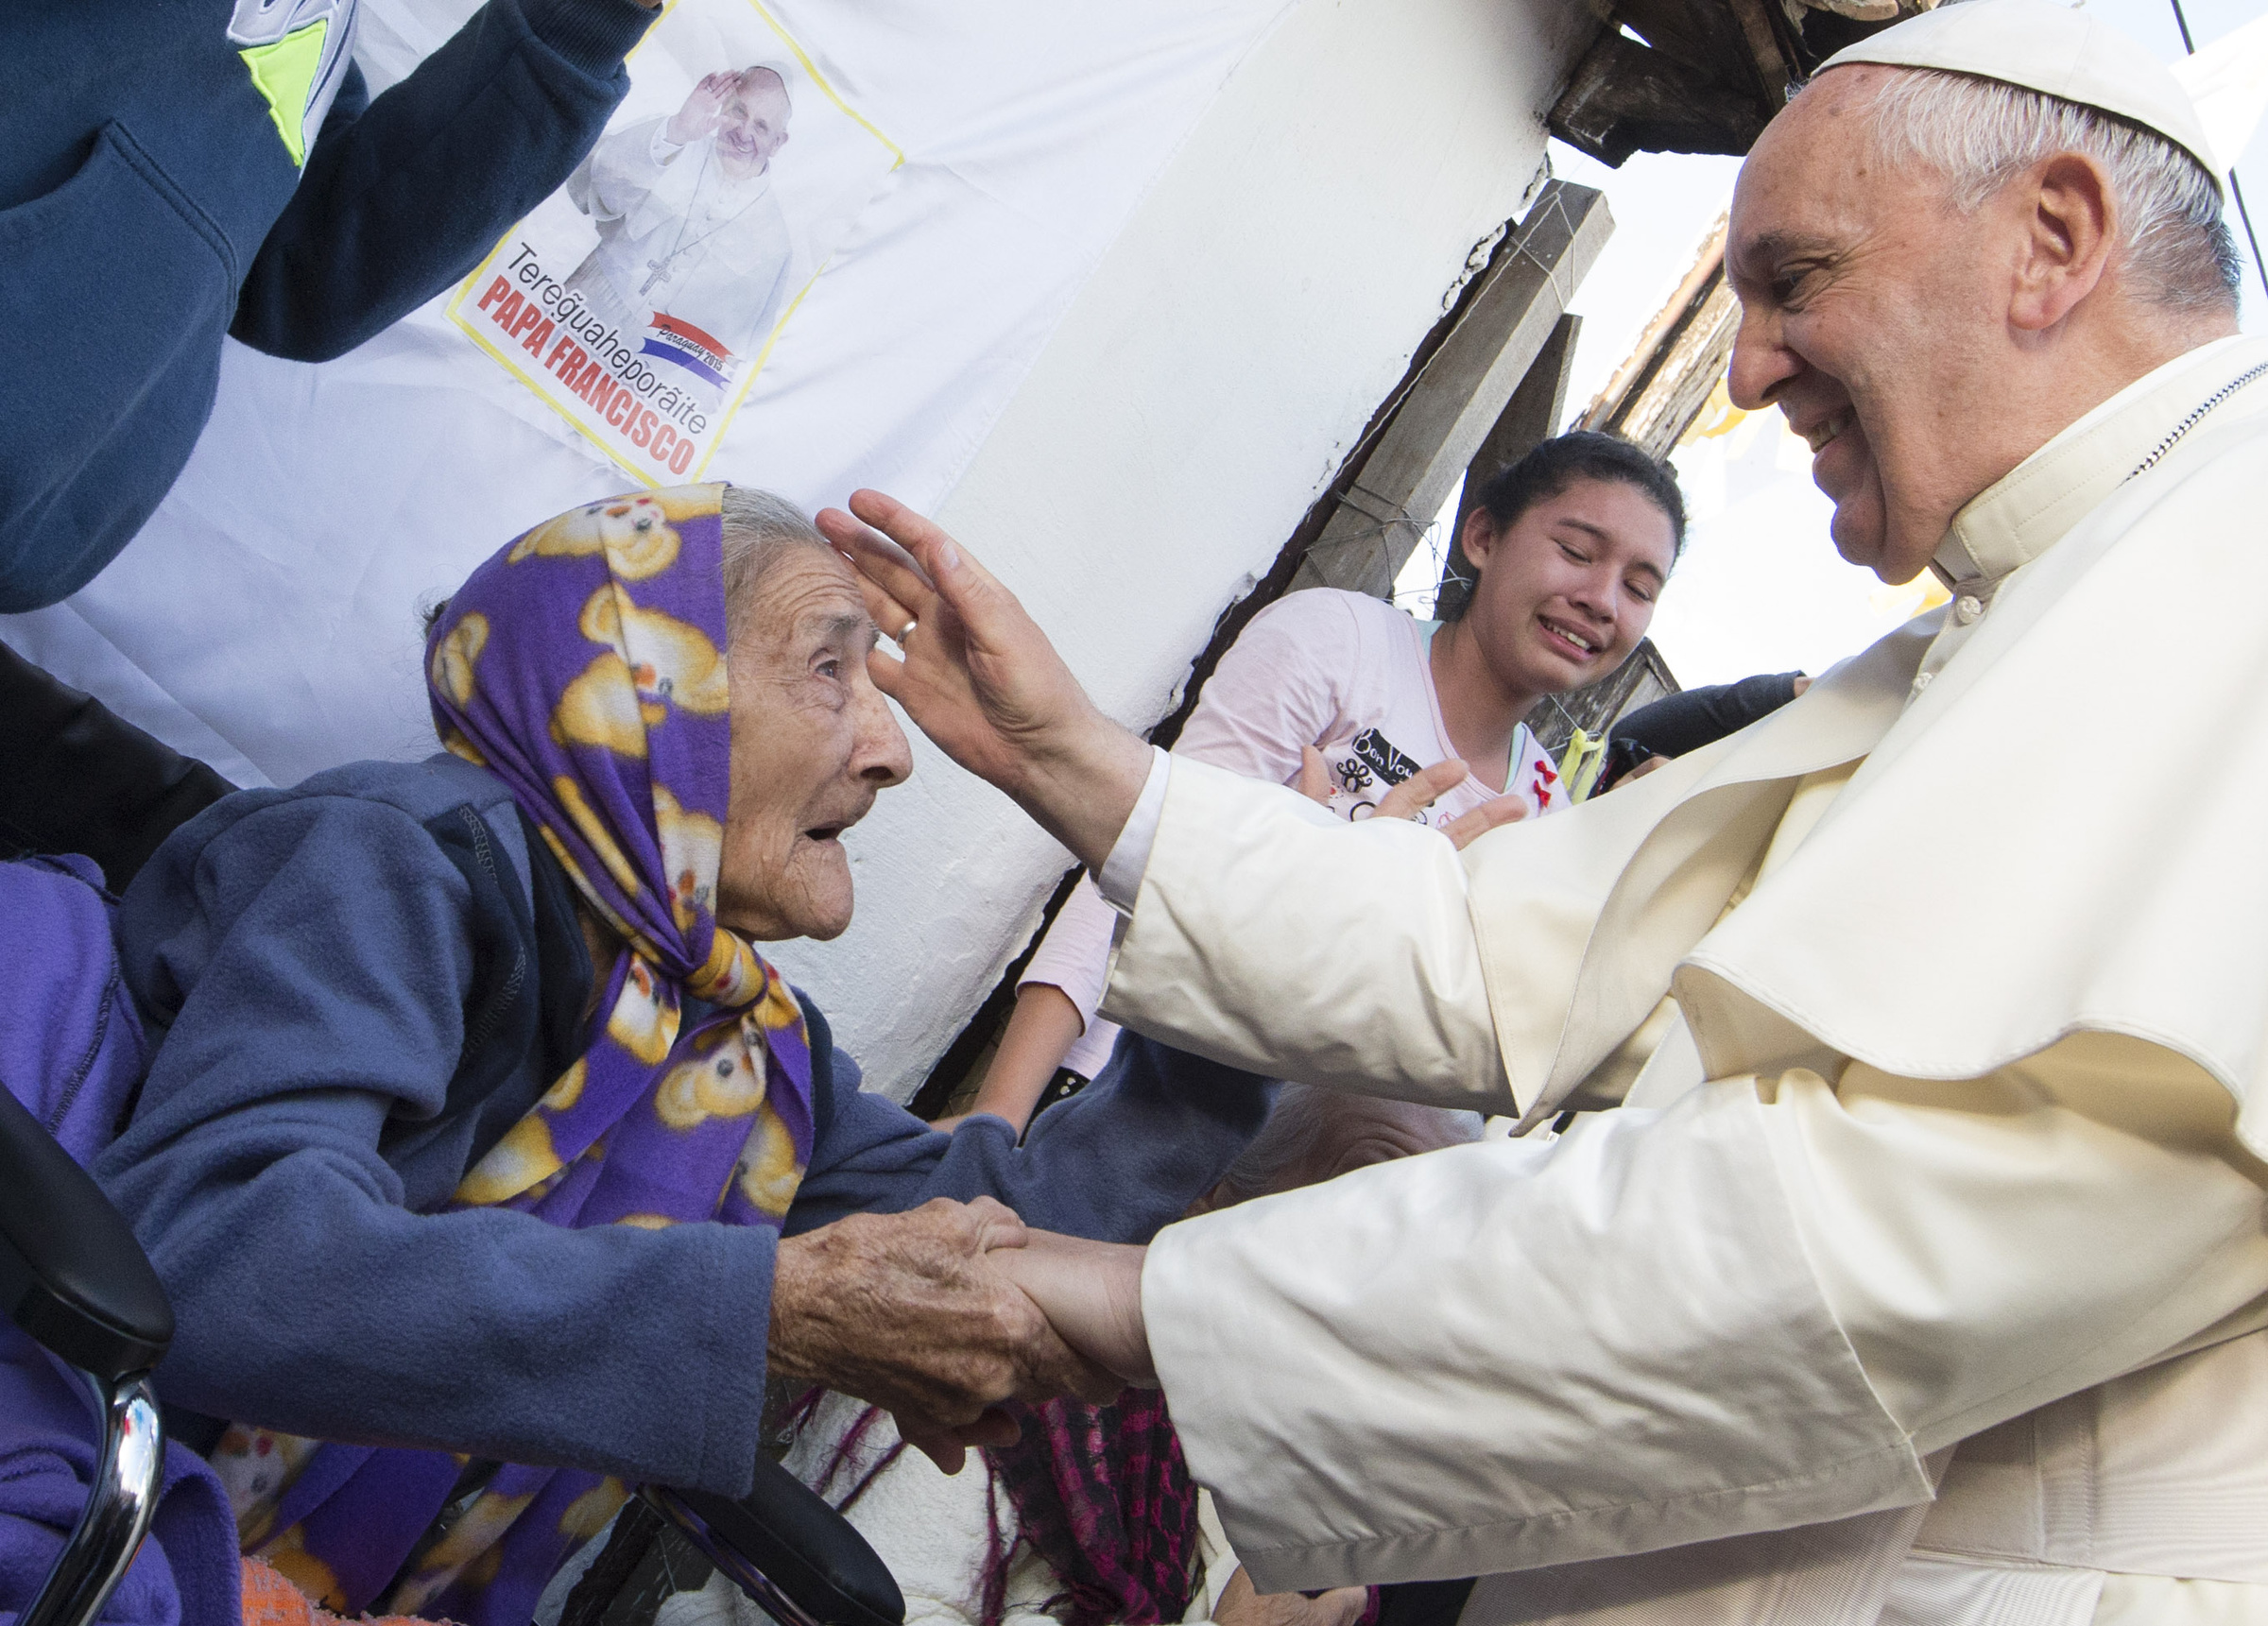 ope Francis greets an elderly woman as he meets with people of Banado Norte, a poor neighborhood in Asuncion, Paraguay, July 12. (CNS/Paul Haring) 